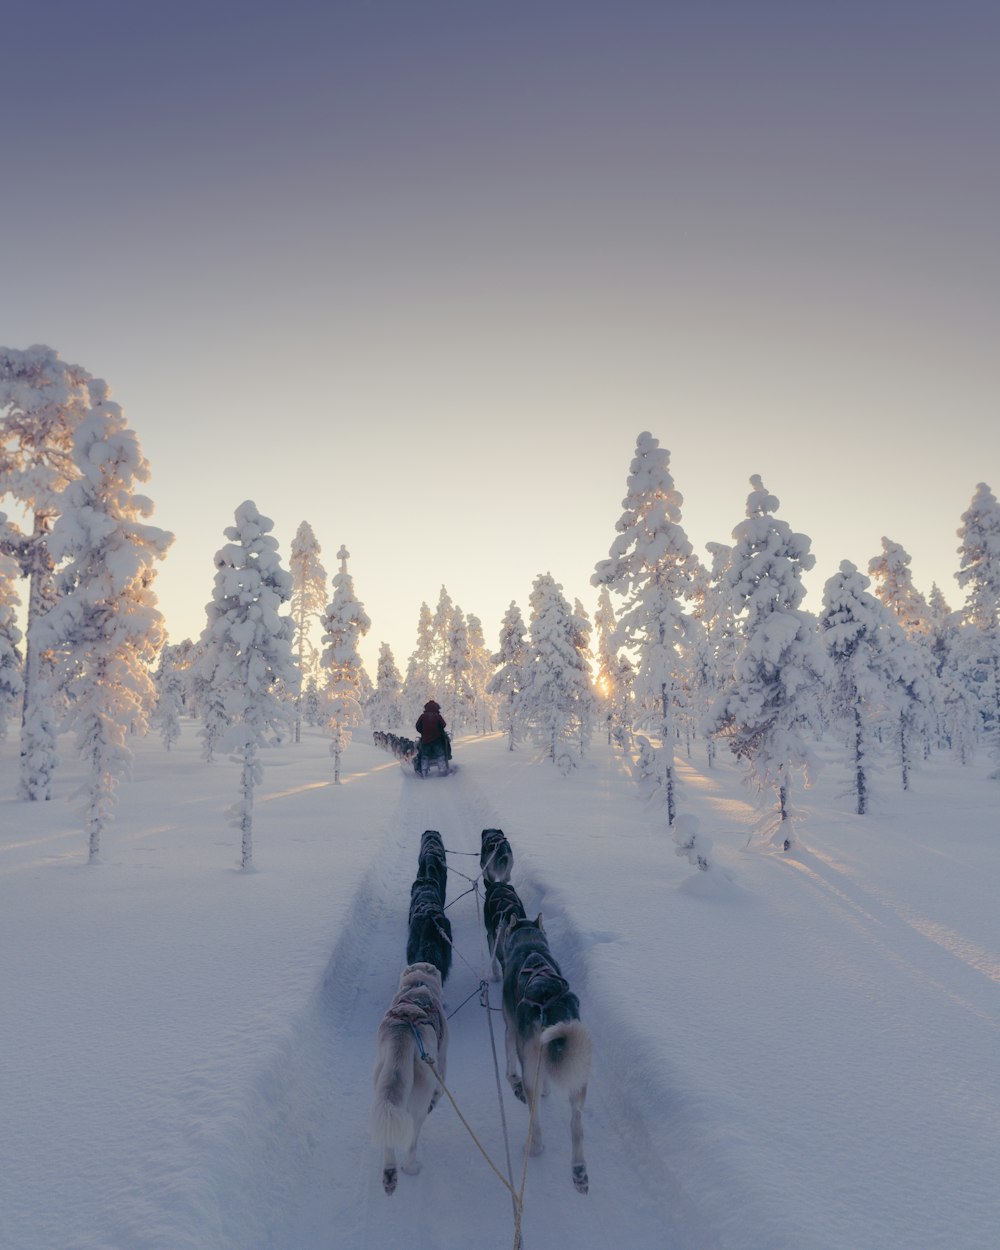 a person riding a sled down a snow covered slope